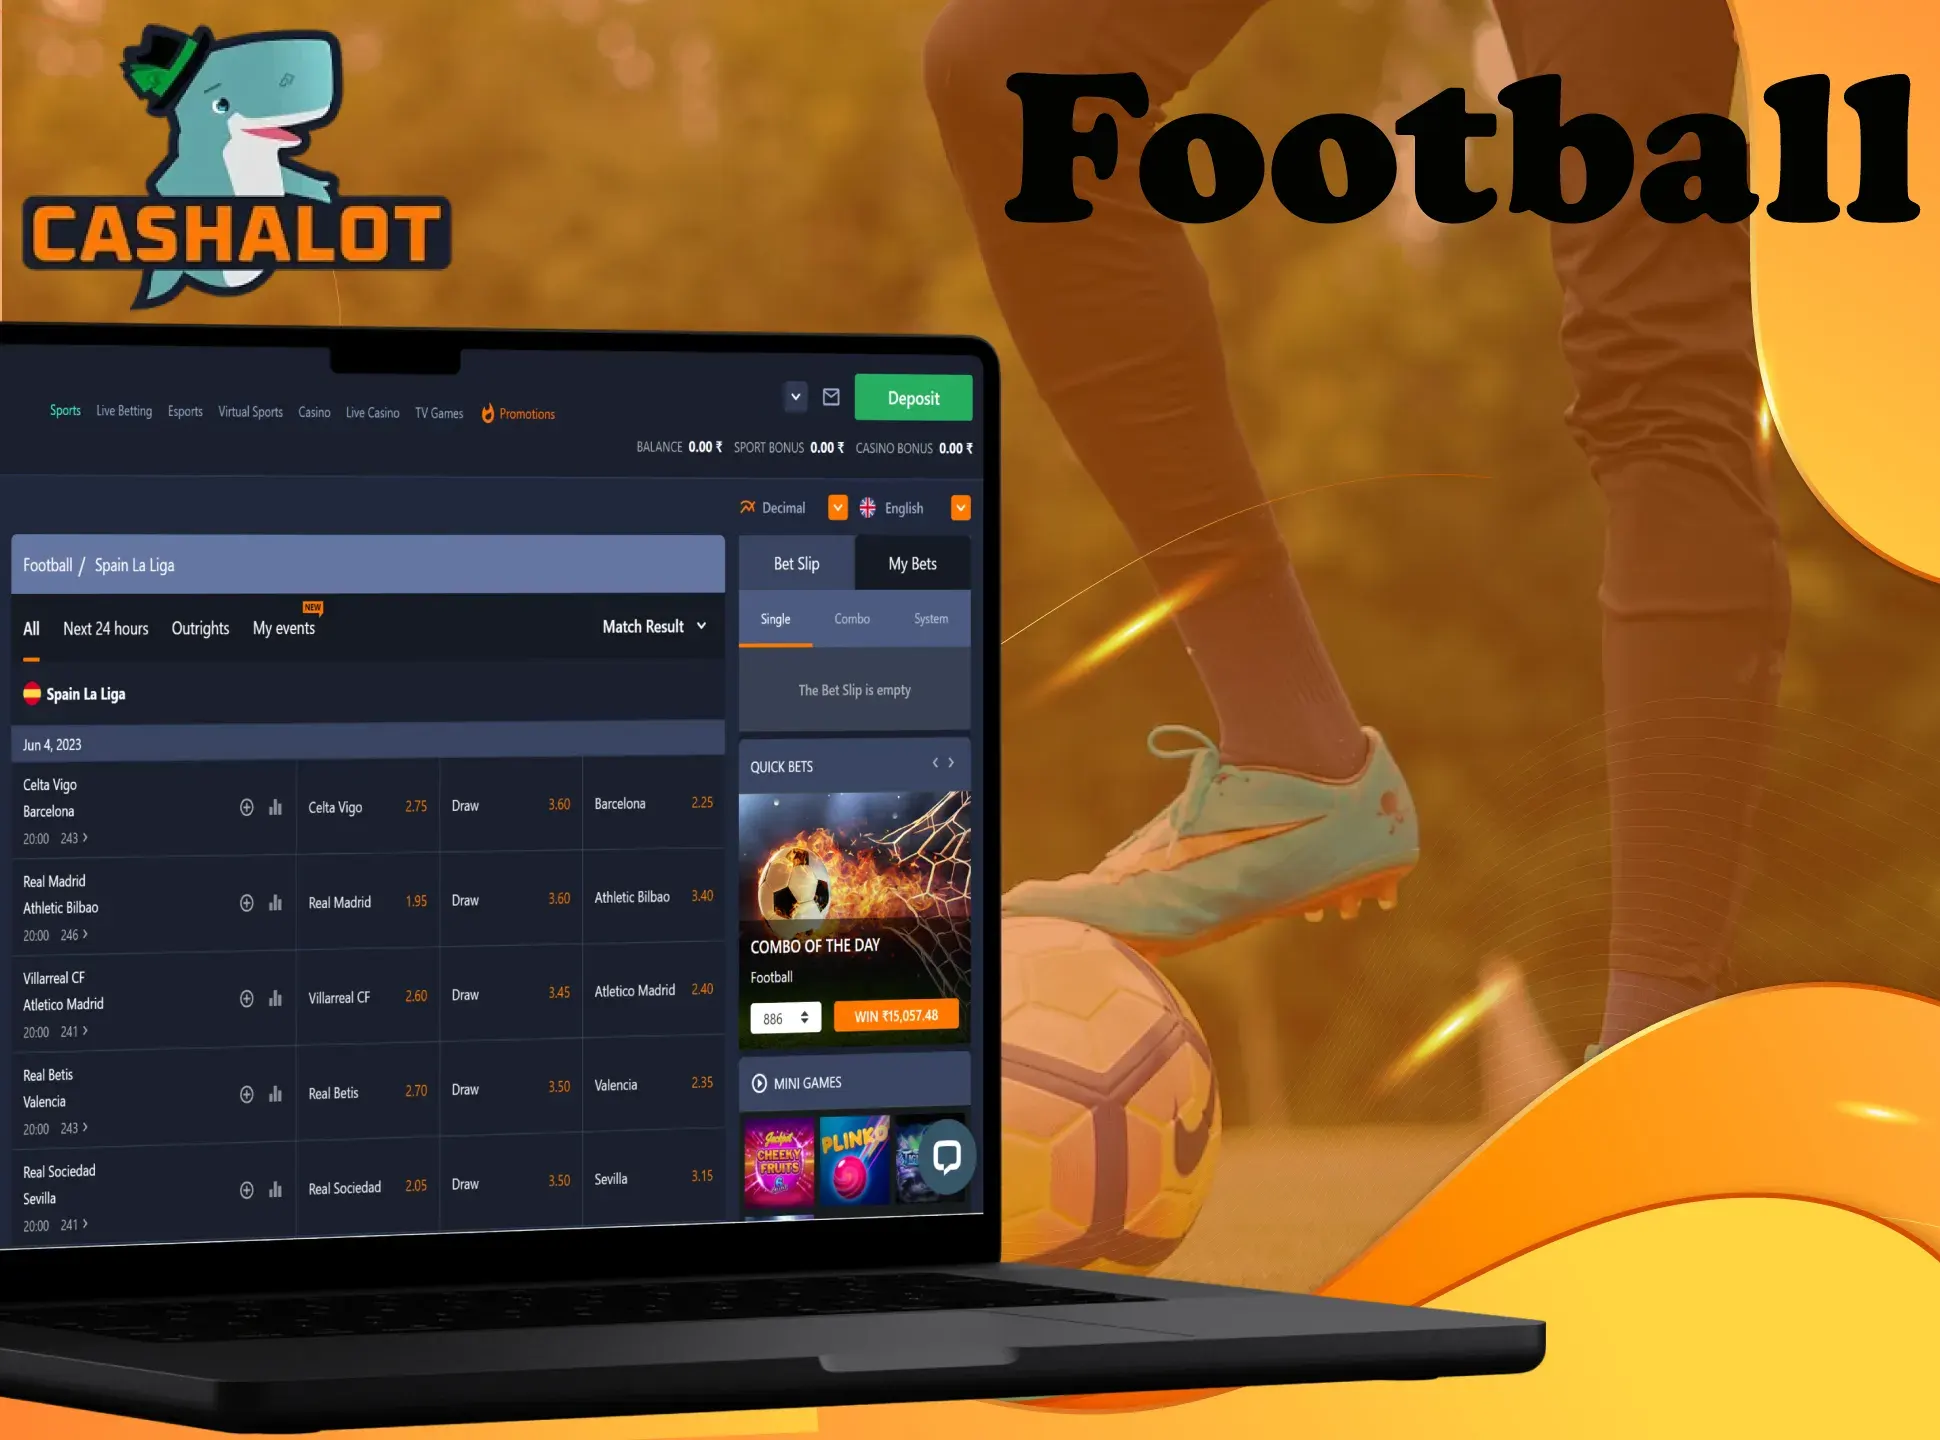 Football is a great sport for betting on at the Cashalot.